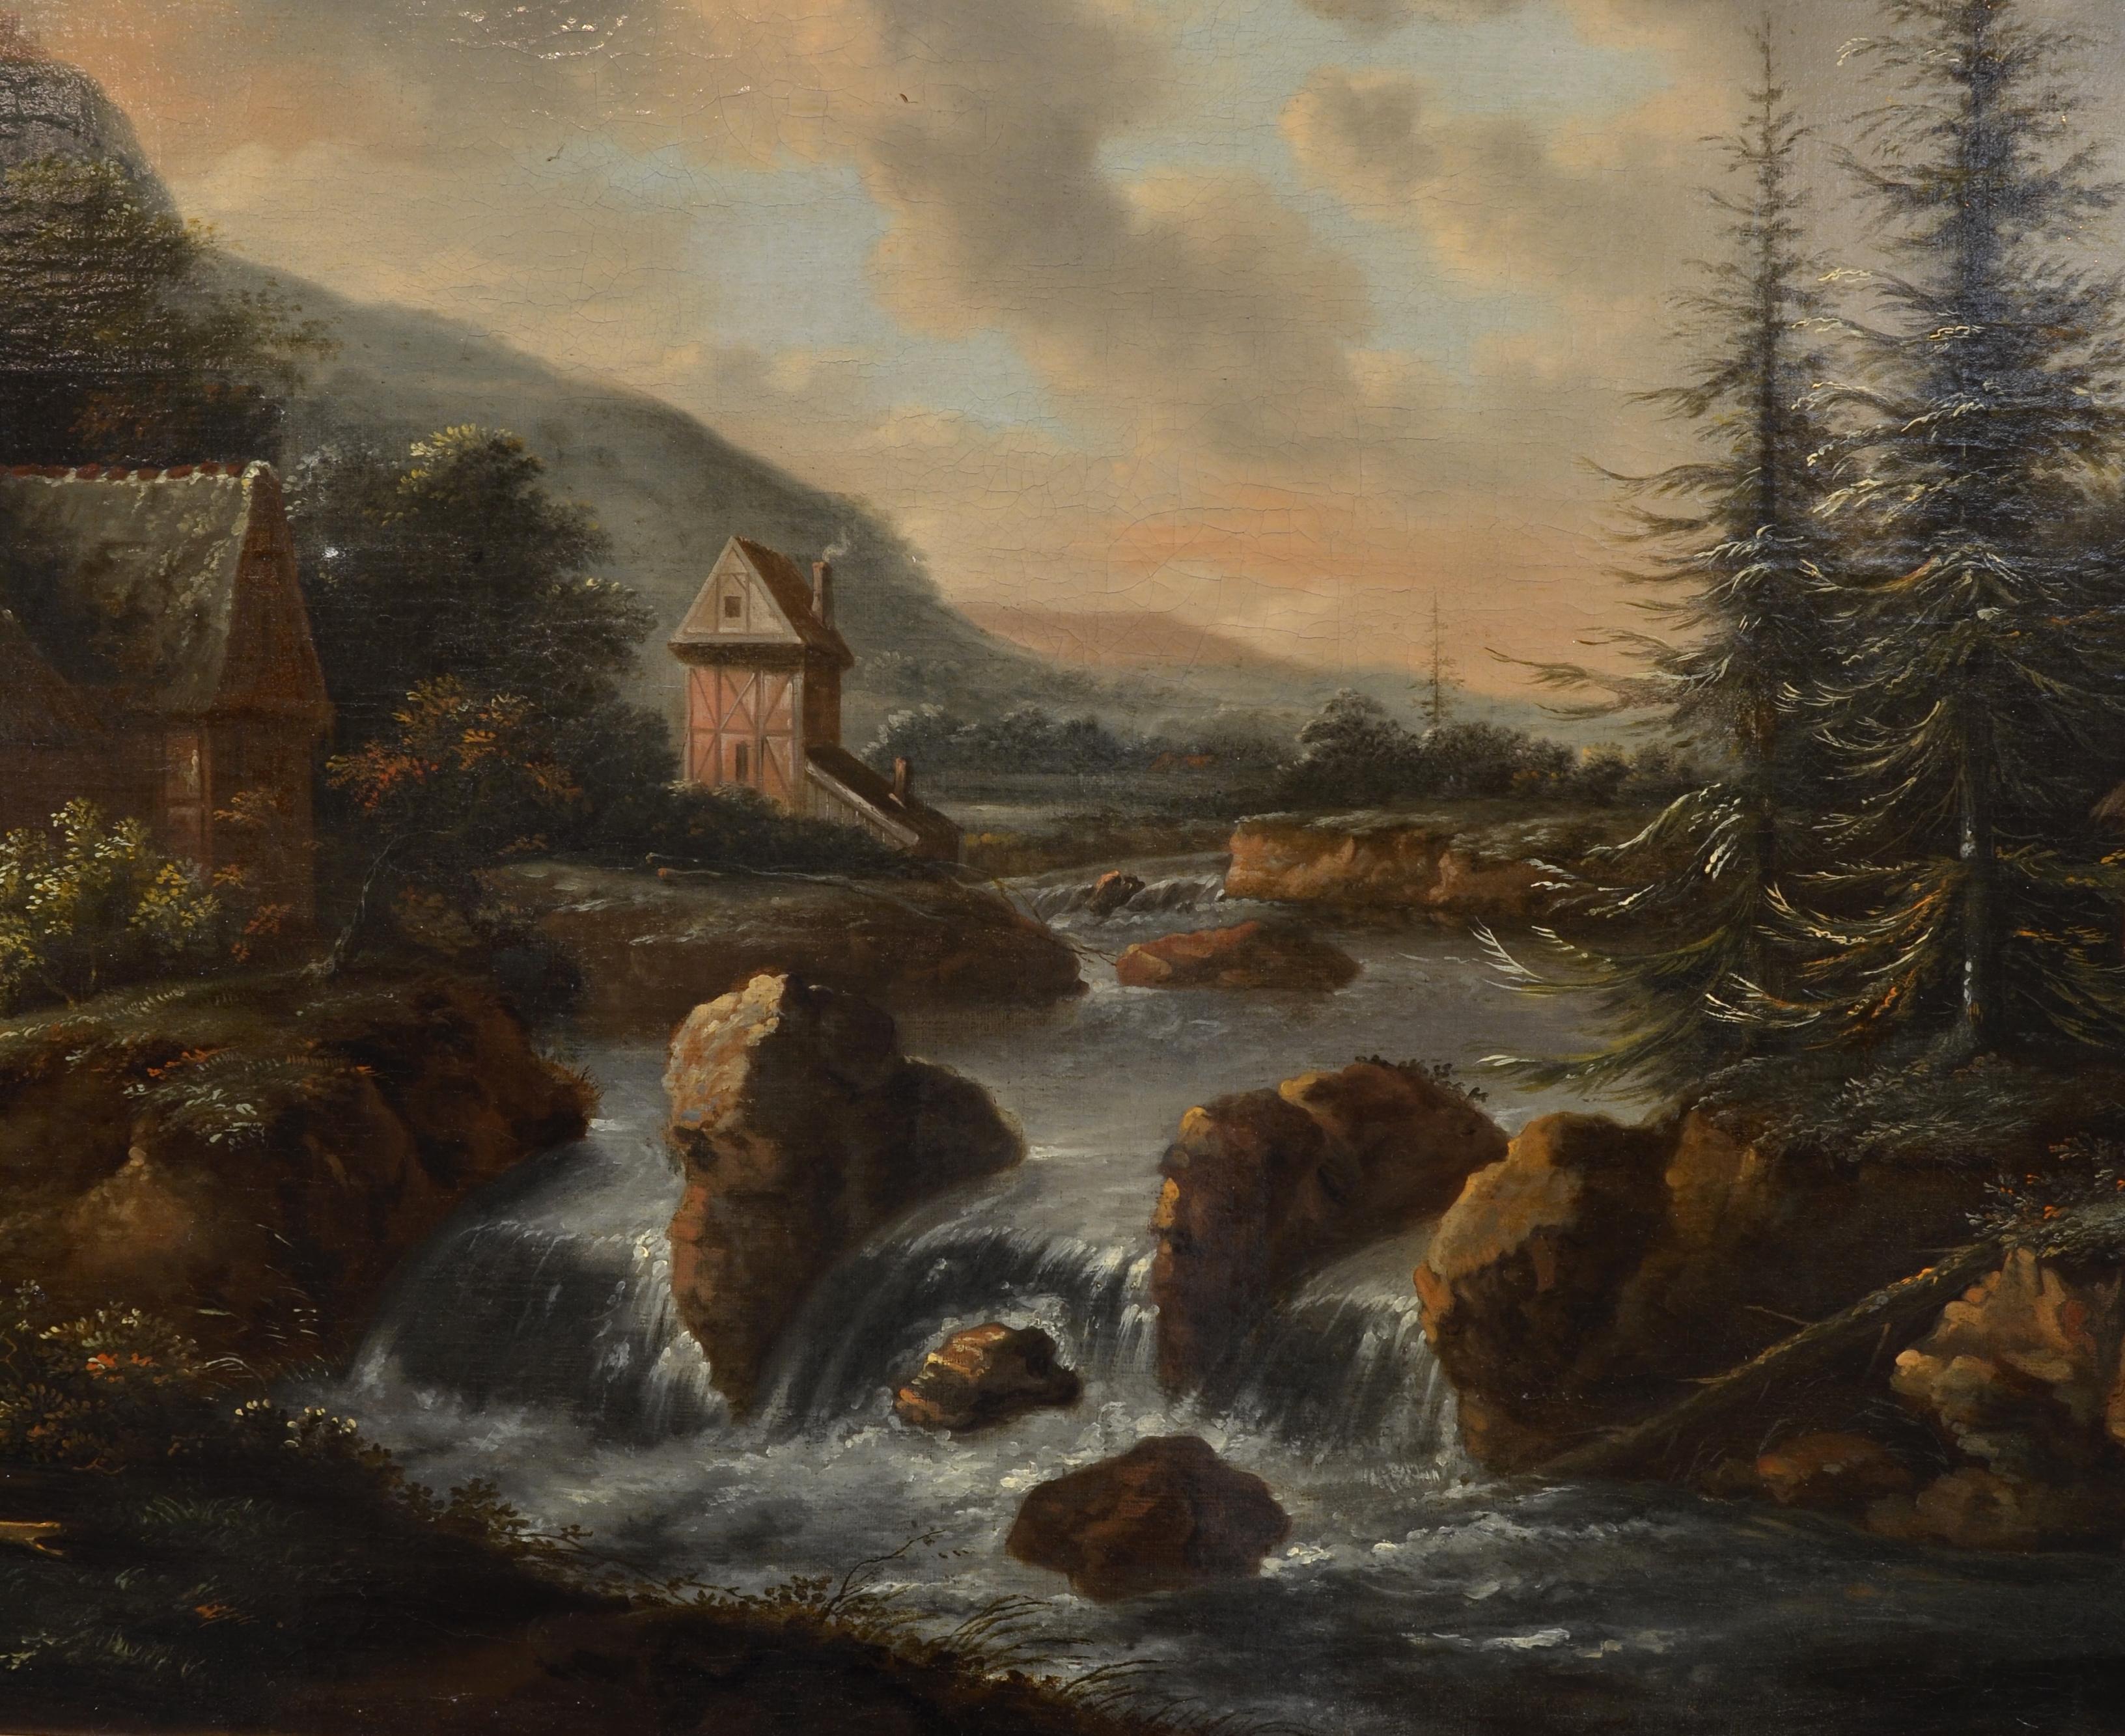 Landscape, Old Master Flemish Painting, Oil on canvas, Baroque 17th Century 5